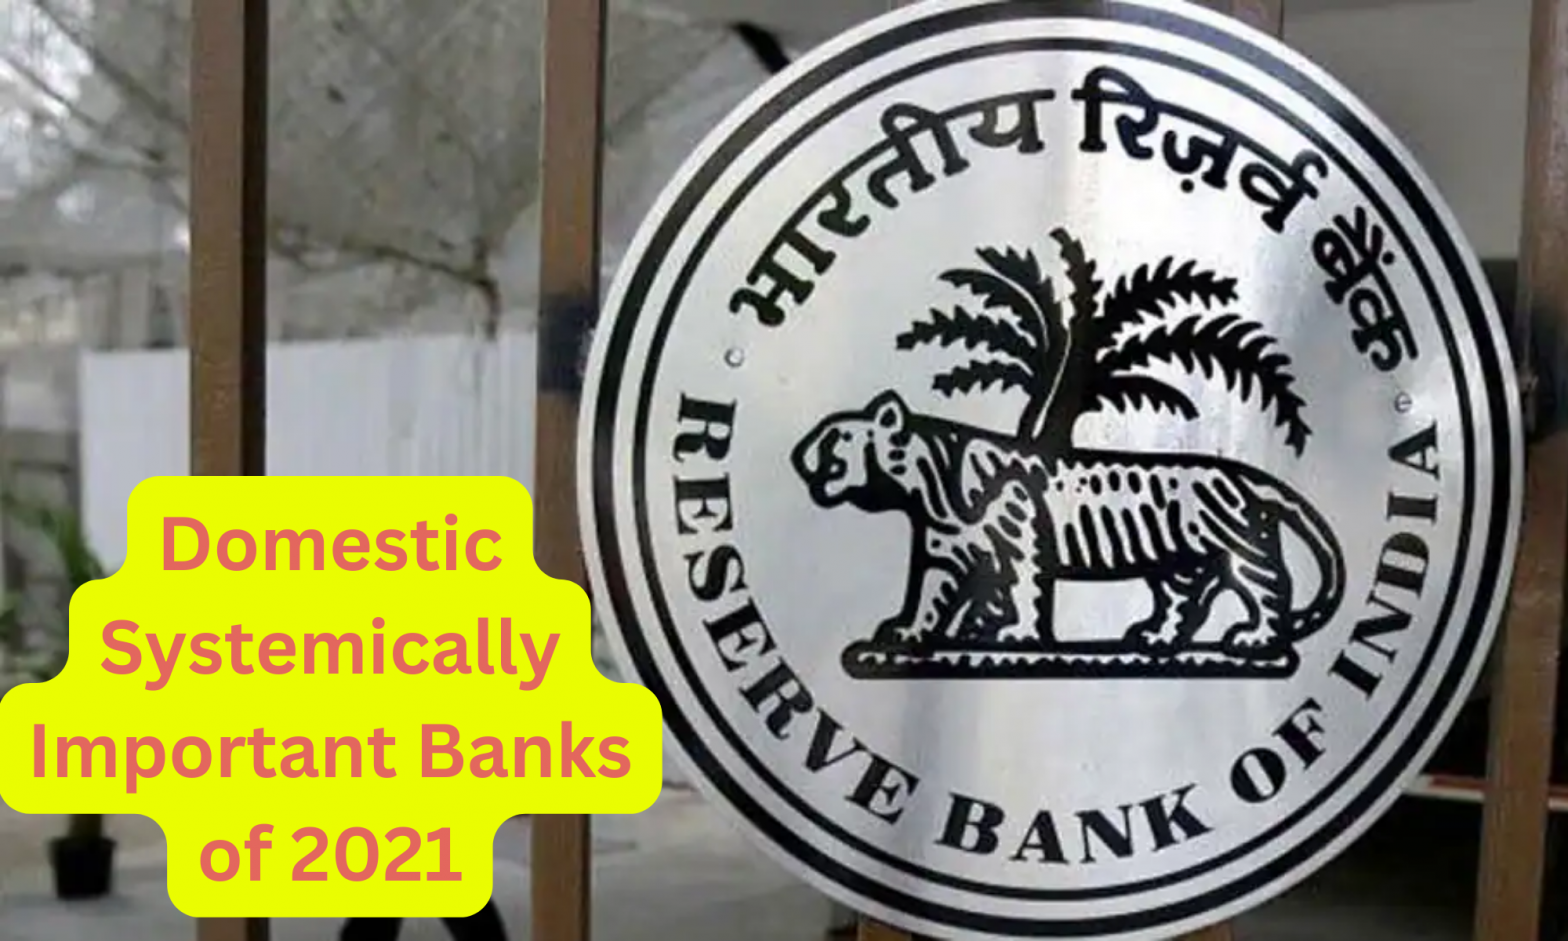 Domestic Systemically Important Banks of 2021